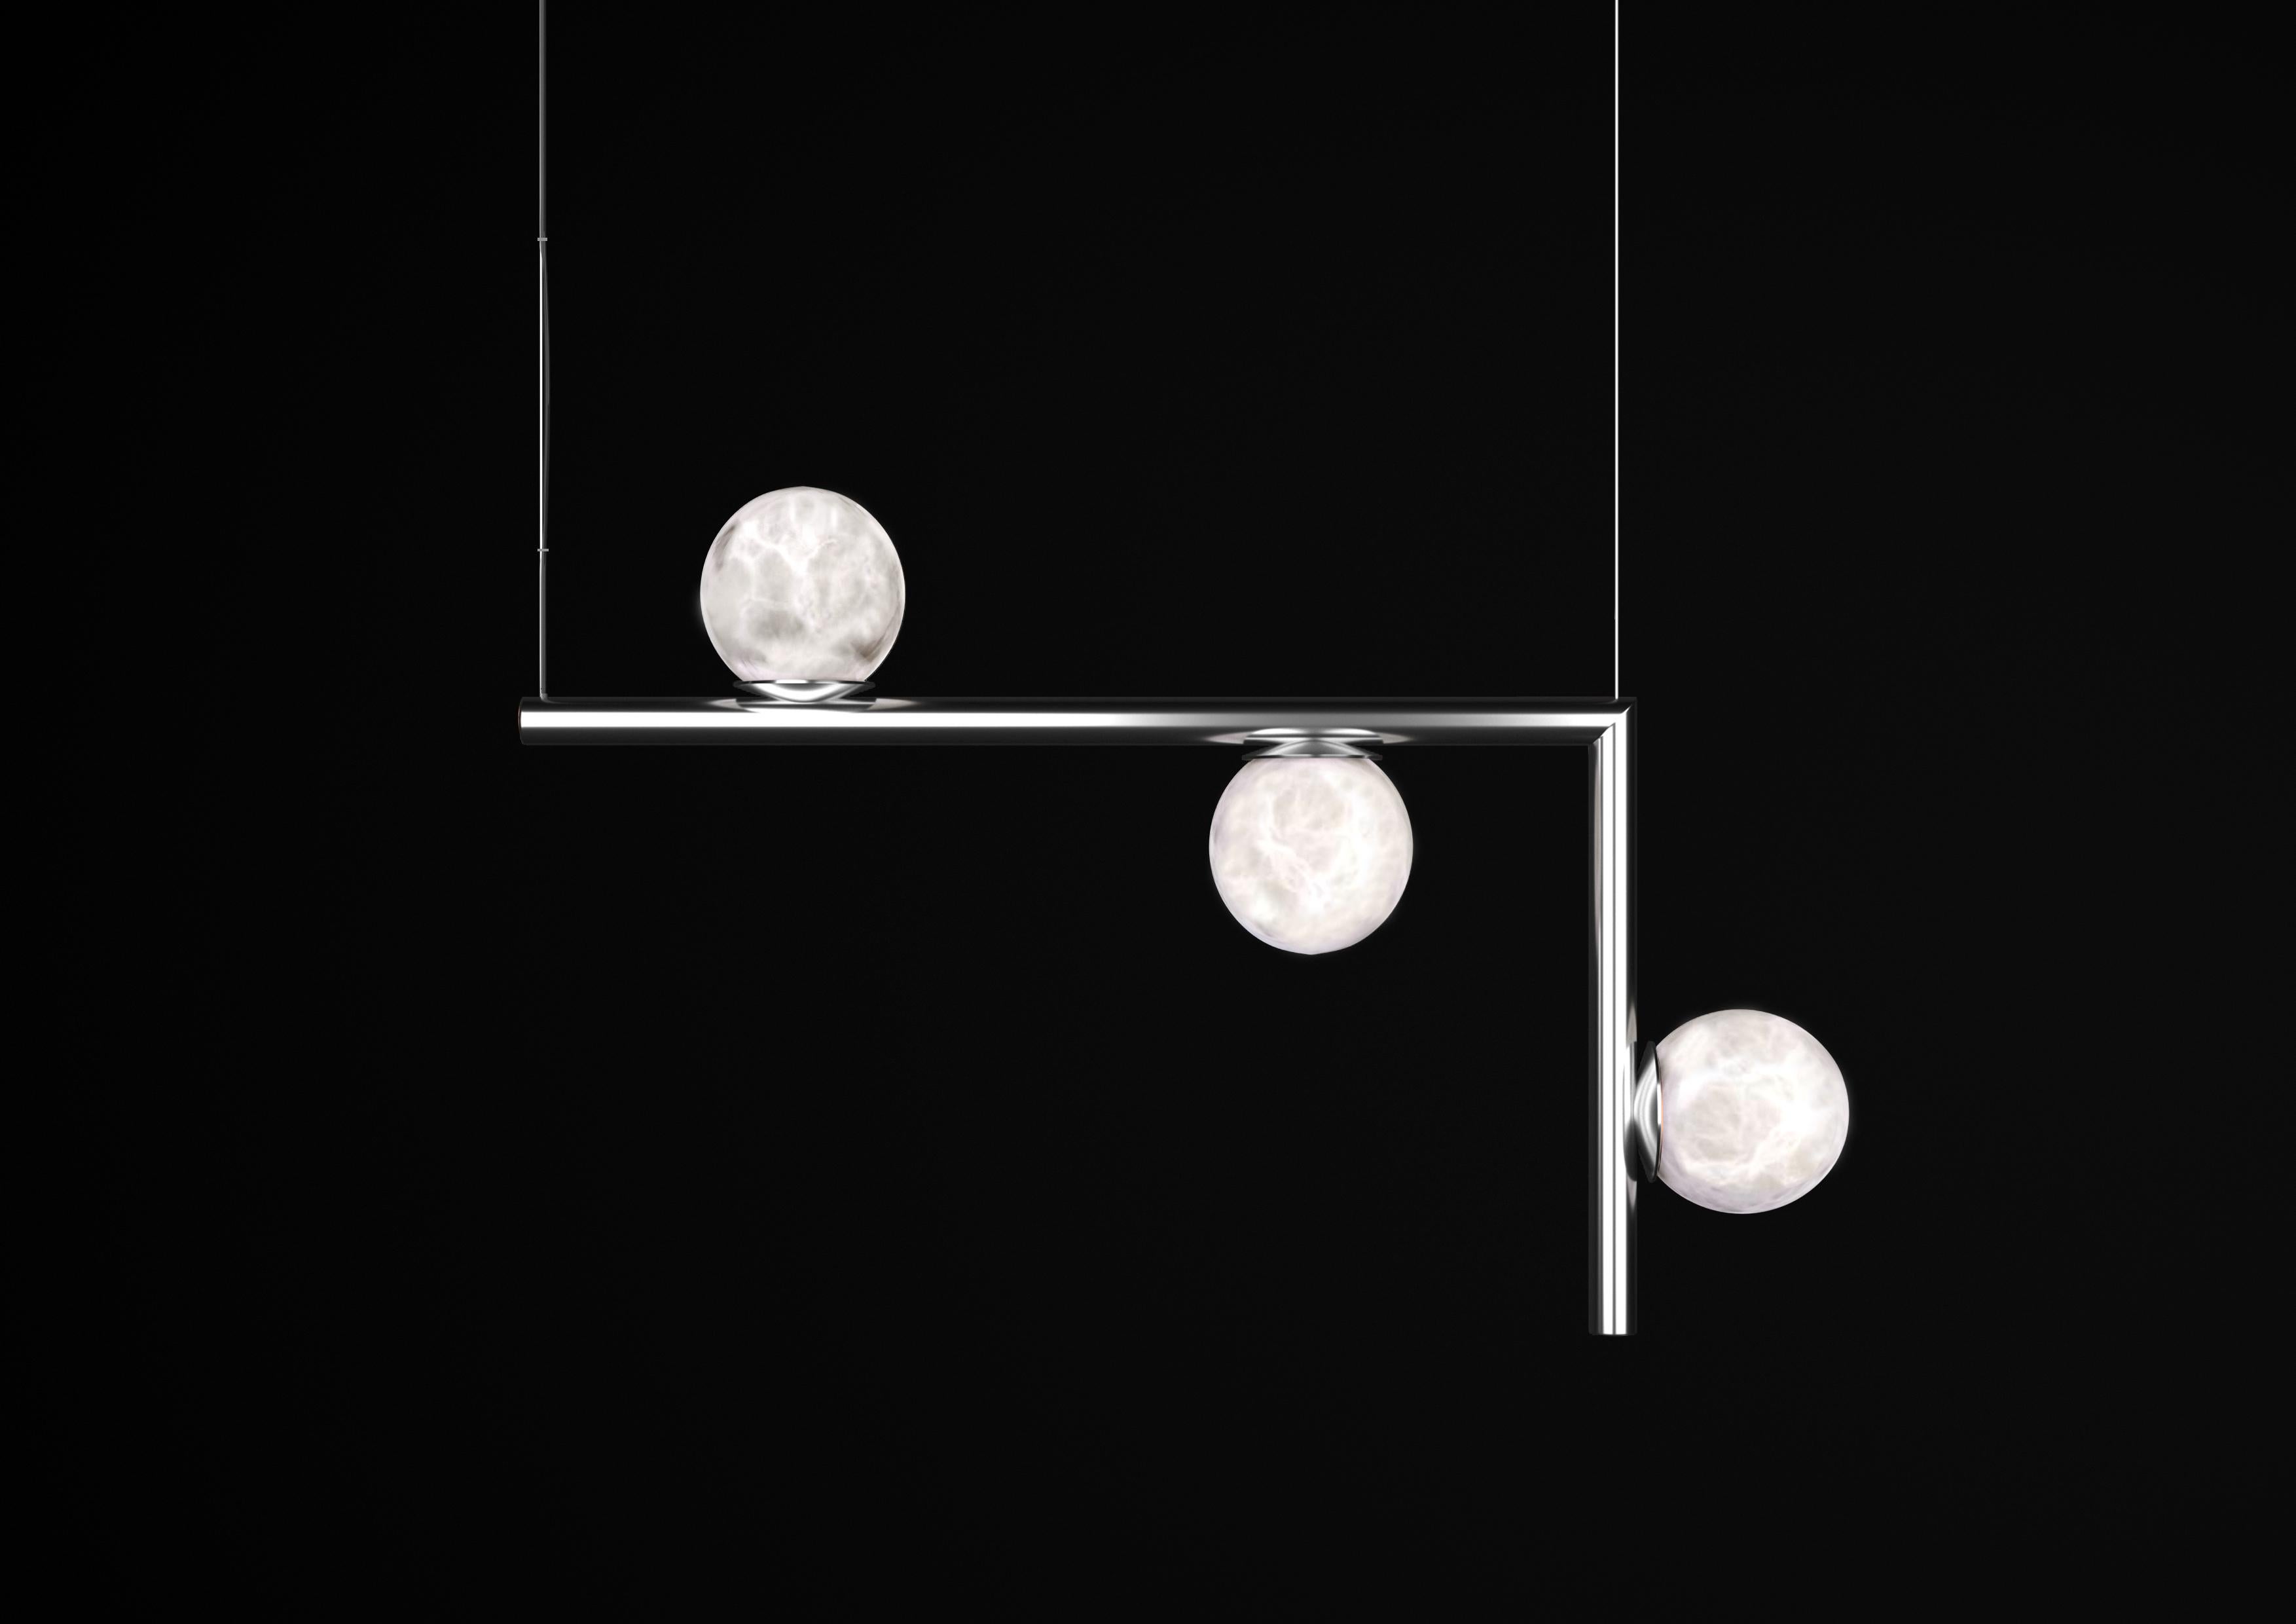 Ofione 2 Shiny Silver Metal Pendant Lamp by Alabastro Italiano
Dimensions: D 14 x W 85 x H 55 cm.
Materials: White alabaster and metal.

Available in different finishes: Shiny Silver, Bronze, Brushed Brass, Ruggine of Florence, Brushed Burnished,